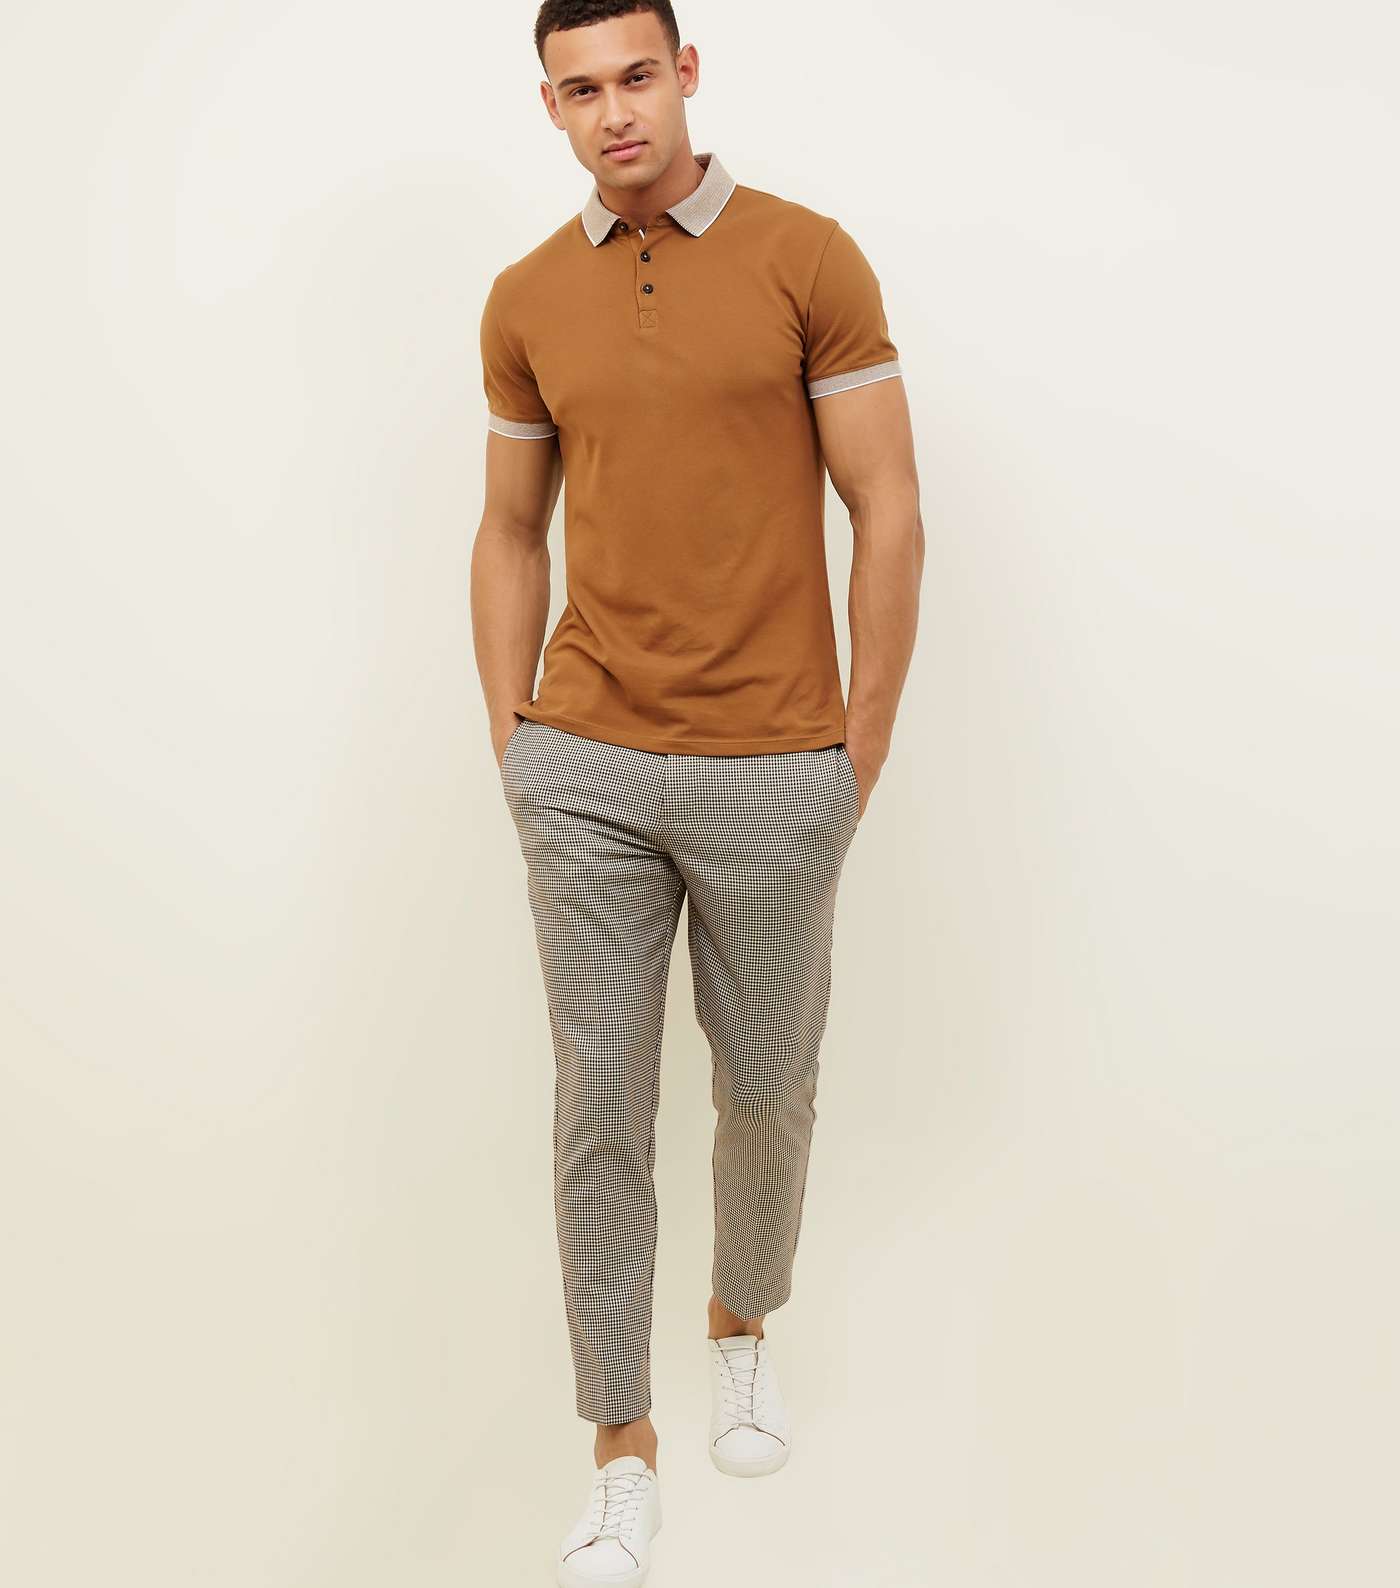 Camel Stripe Collar Muscle Fit Polo Shirt Image 2